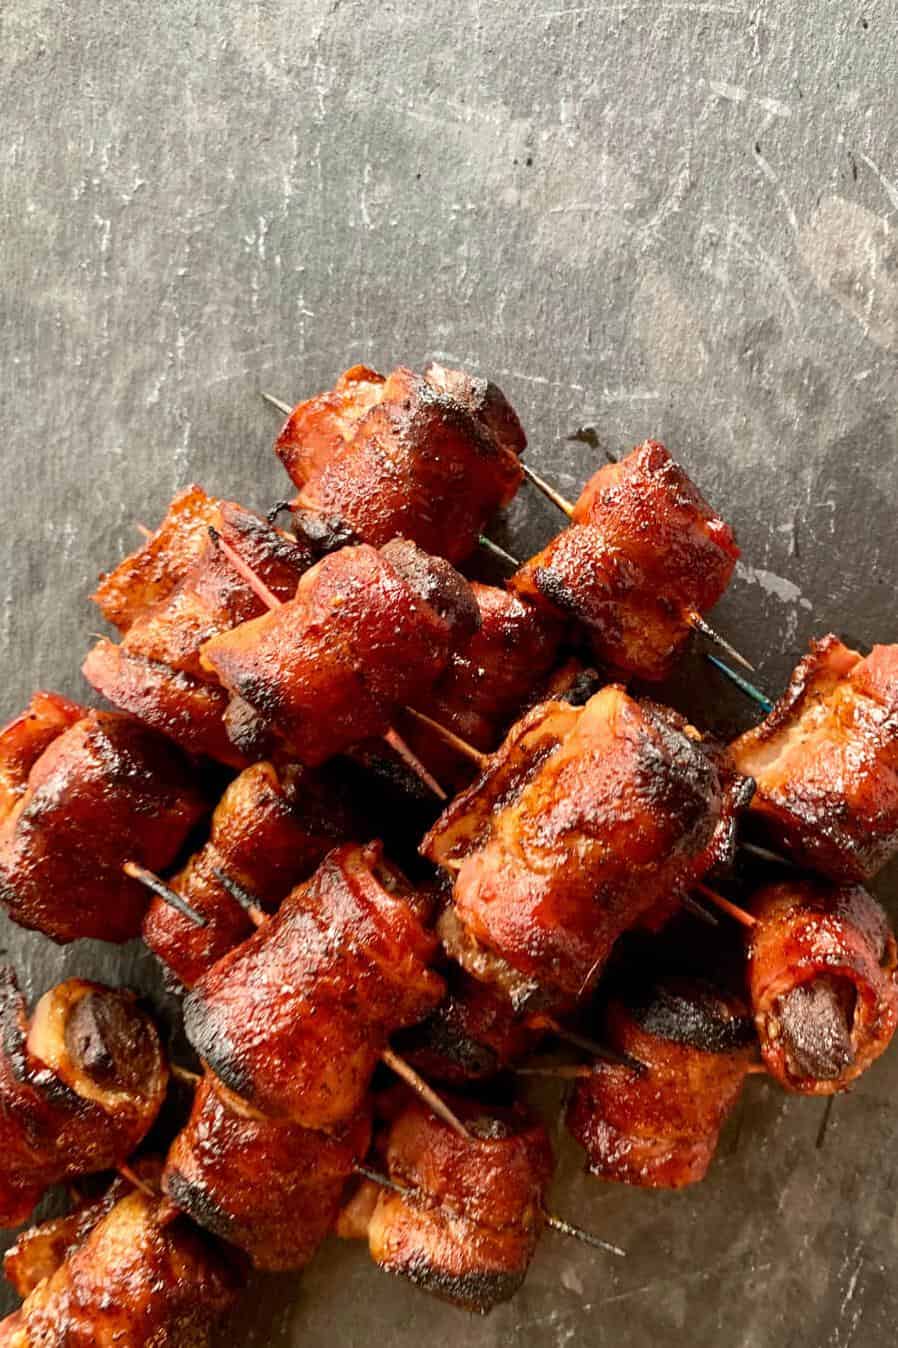  Sink your teeth into these savory venison bites!